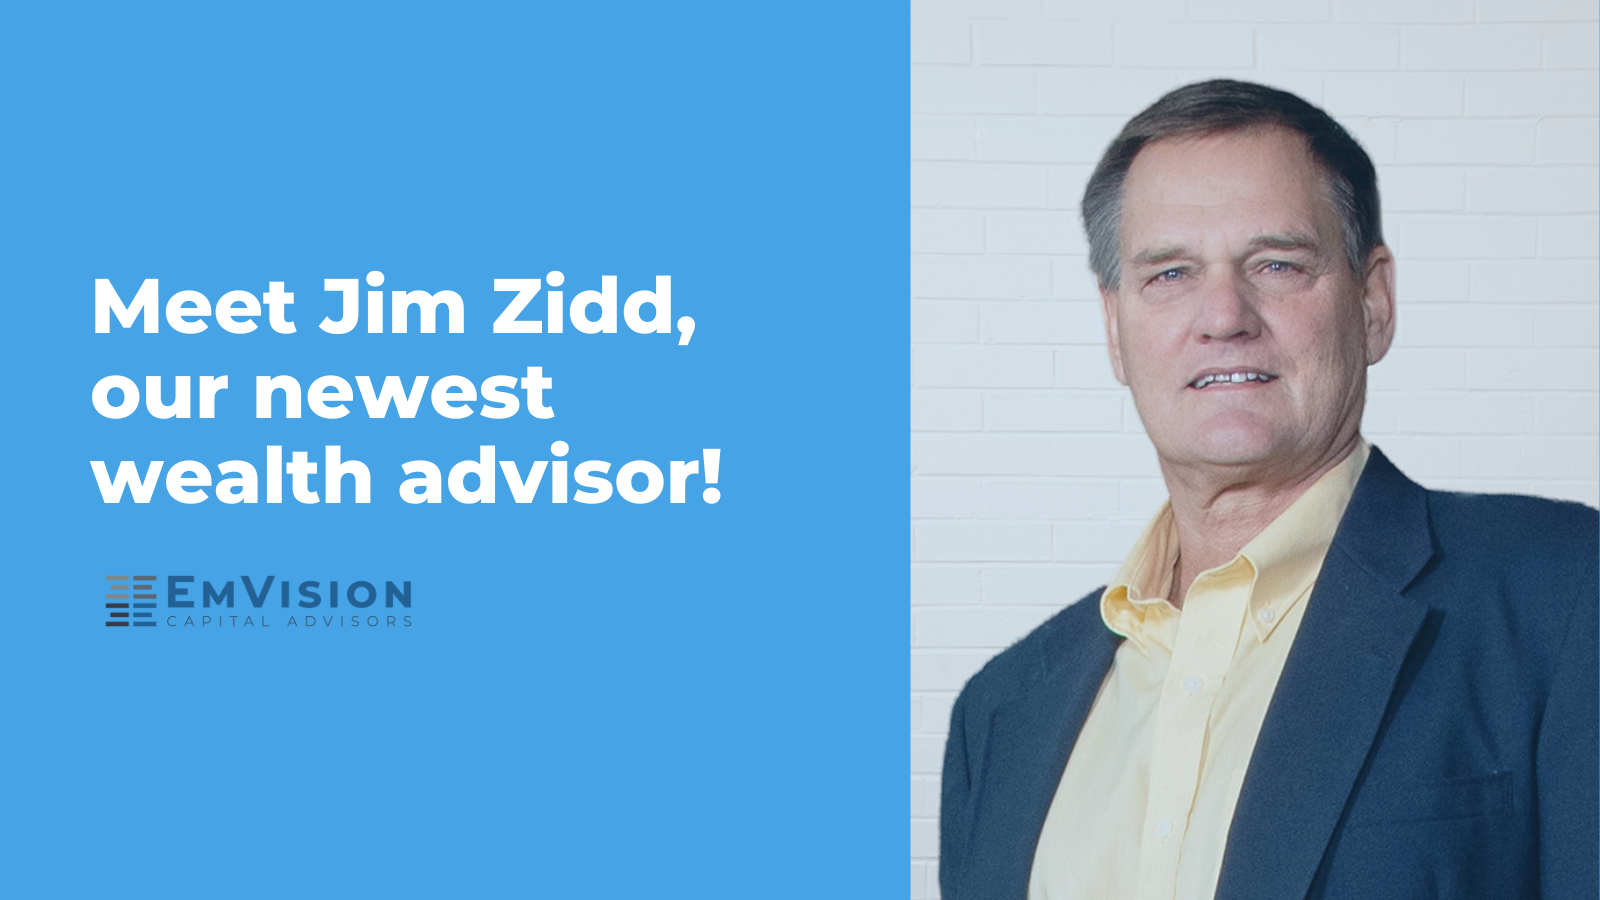 Jim Zidd Joins EmVision to Provide Additional Offerings to Better Serve Clients